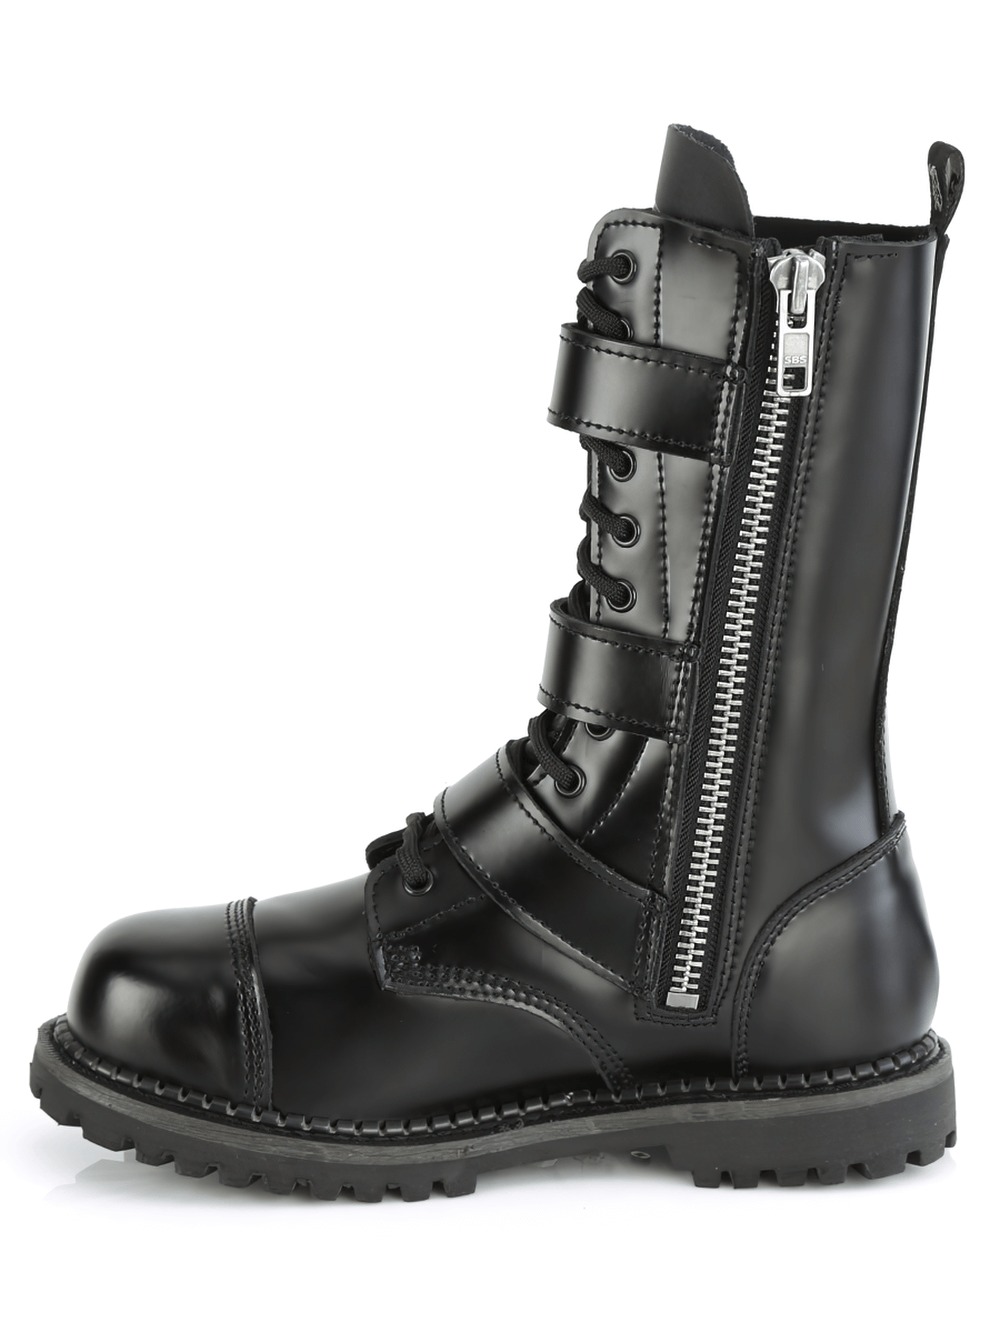 DEMONIA Punk Style Ankle Boots with Edgy Buckles